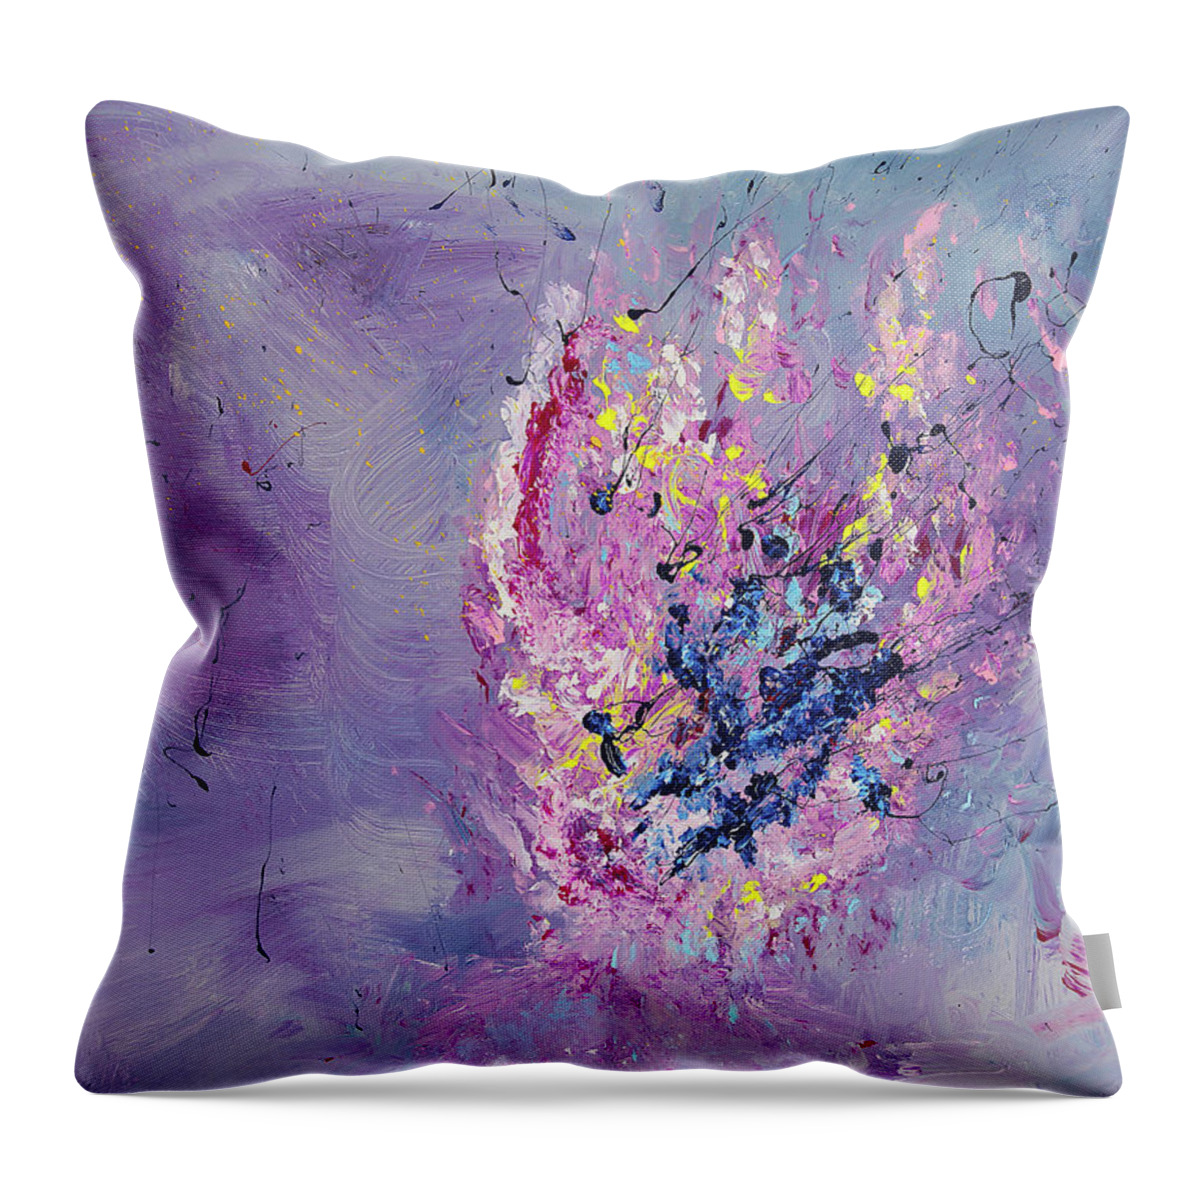 Touches Throw Pillow featuring the painting Touches Of Holland by Joe Loffredo